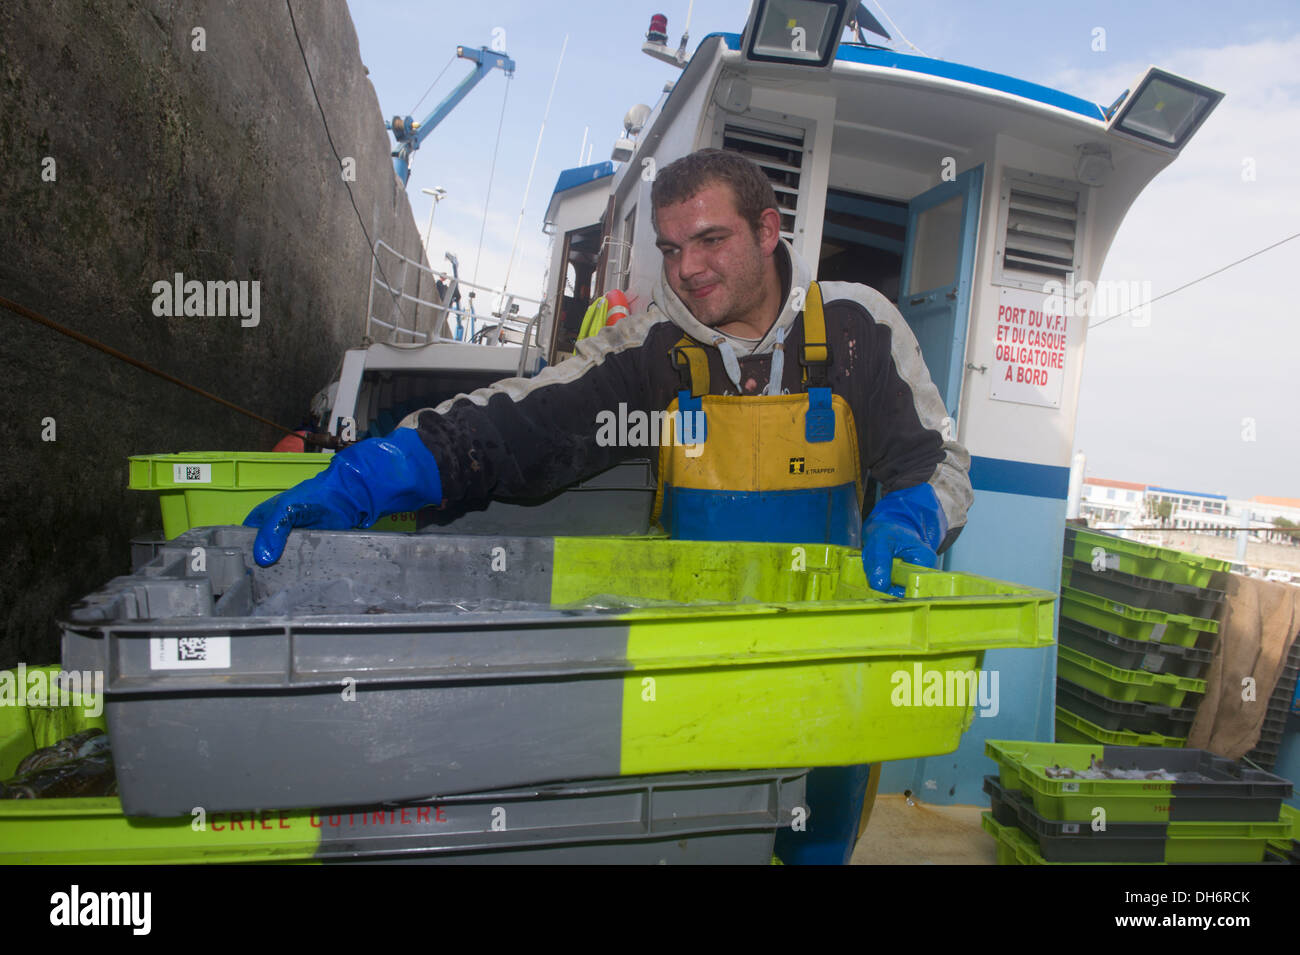 At the harbor dock, a fisherman is pilling boxes filled with fishes Stock Photo